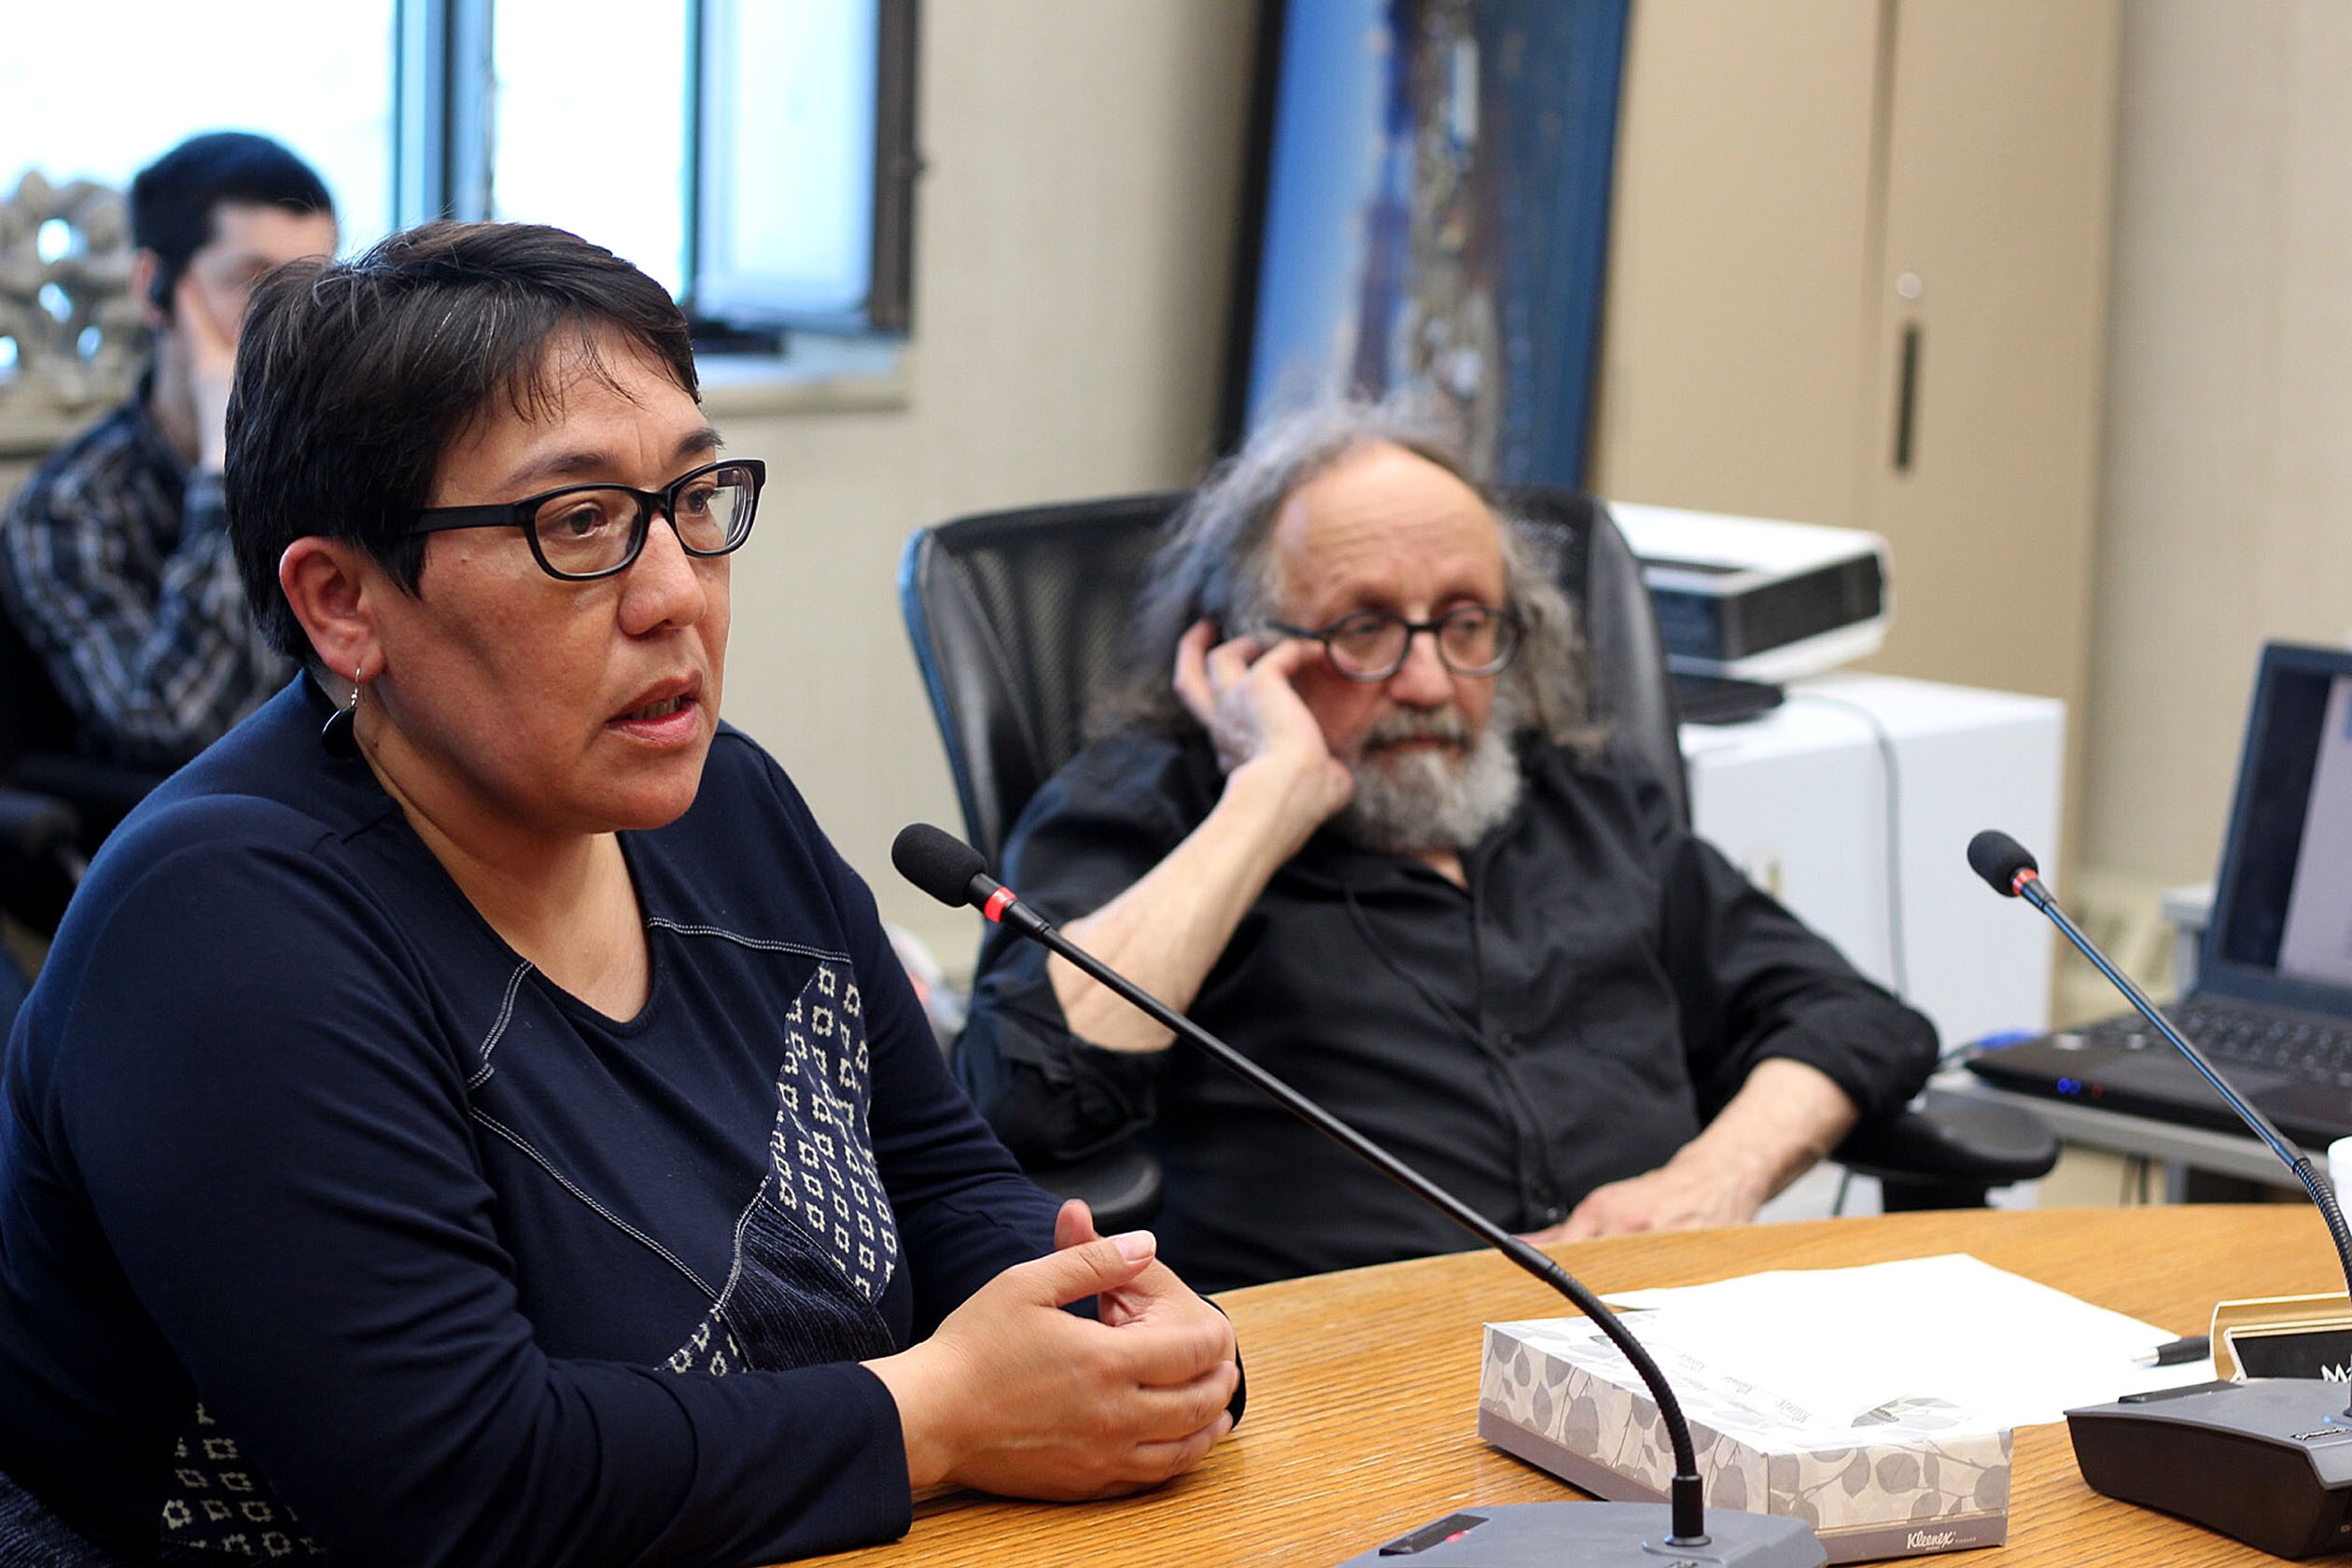 Pangnirtung MLA Margaret Nakashuk at a meeting held last night between hamlet representatives and civil servants from the Nunavut government, along with the Nunavut RCMP. “We need to speak out,” Nakashuk said. (PHOTO BY BETH BROWN)